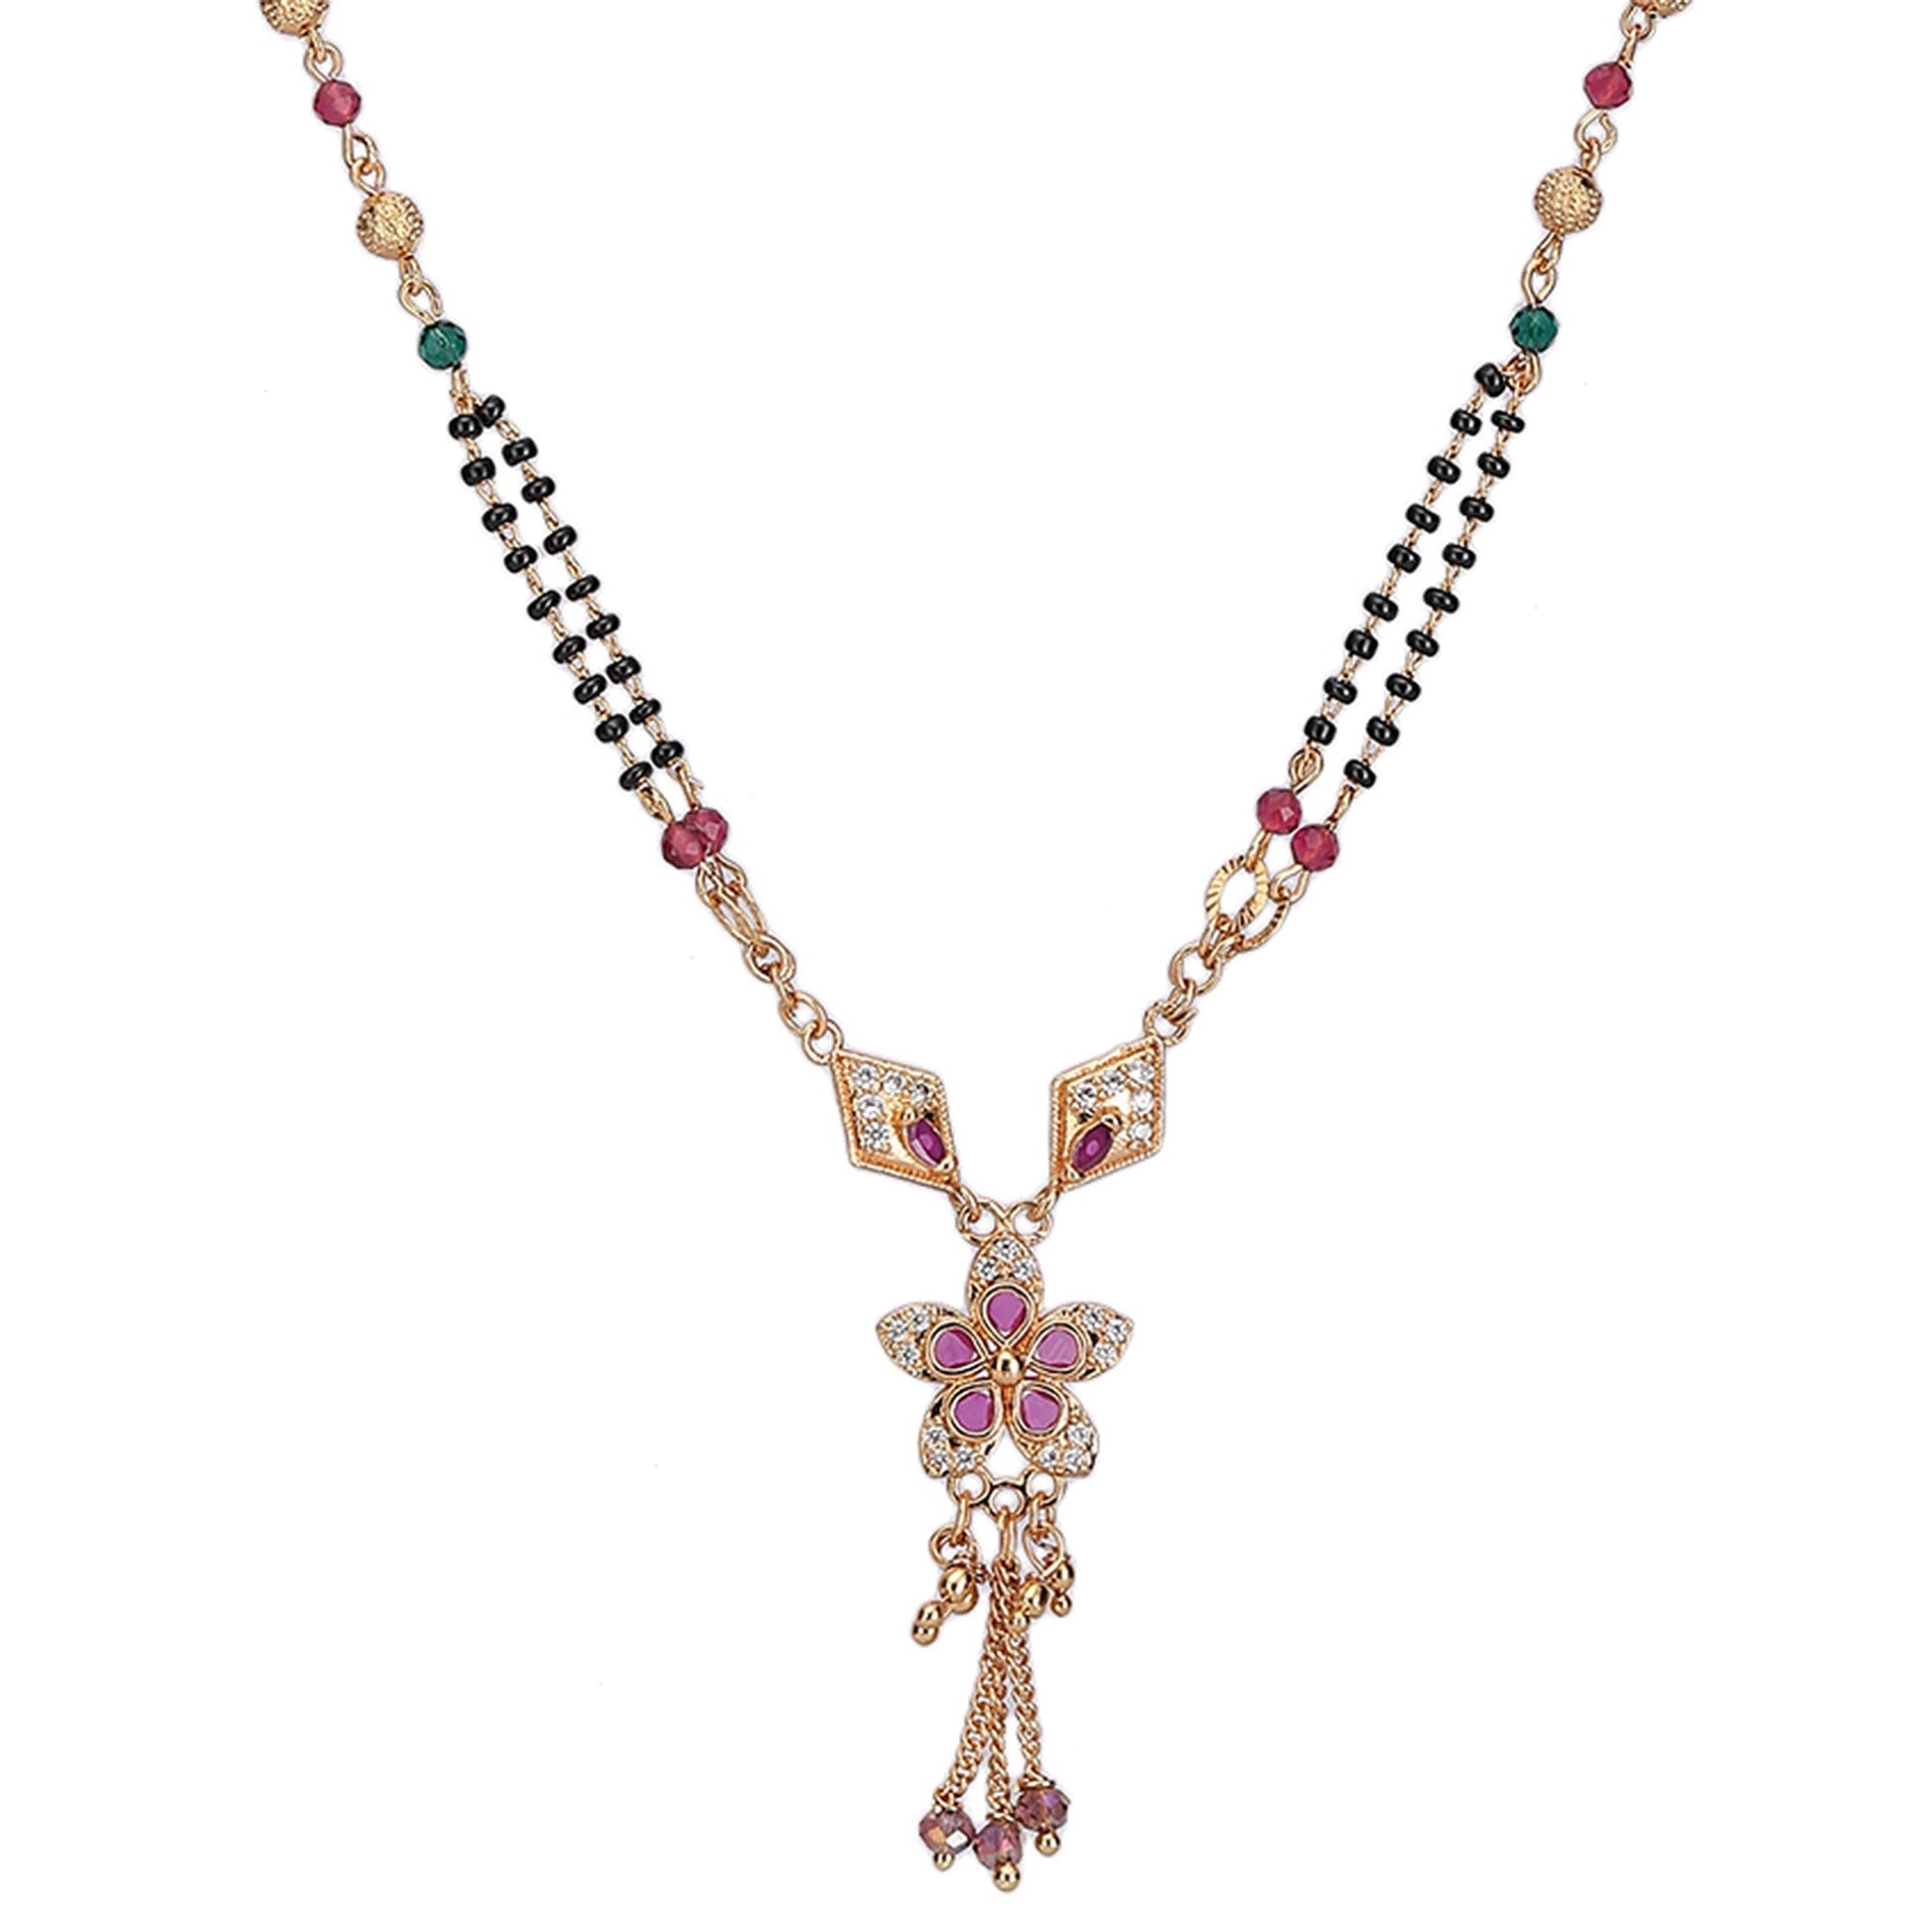 Bhagya Lakshmi Gold Plated Mangalsutra Collection - Shop Now!